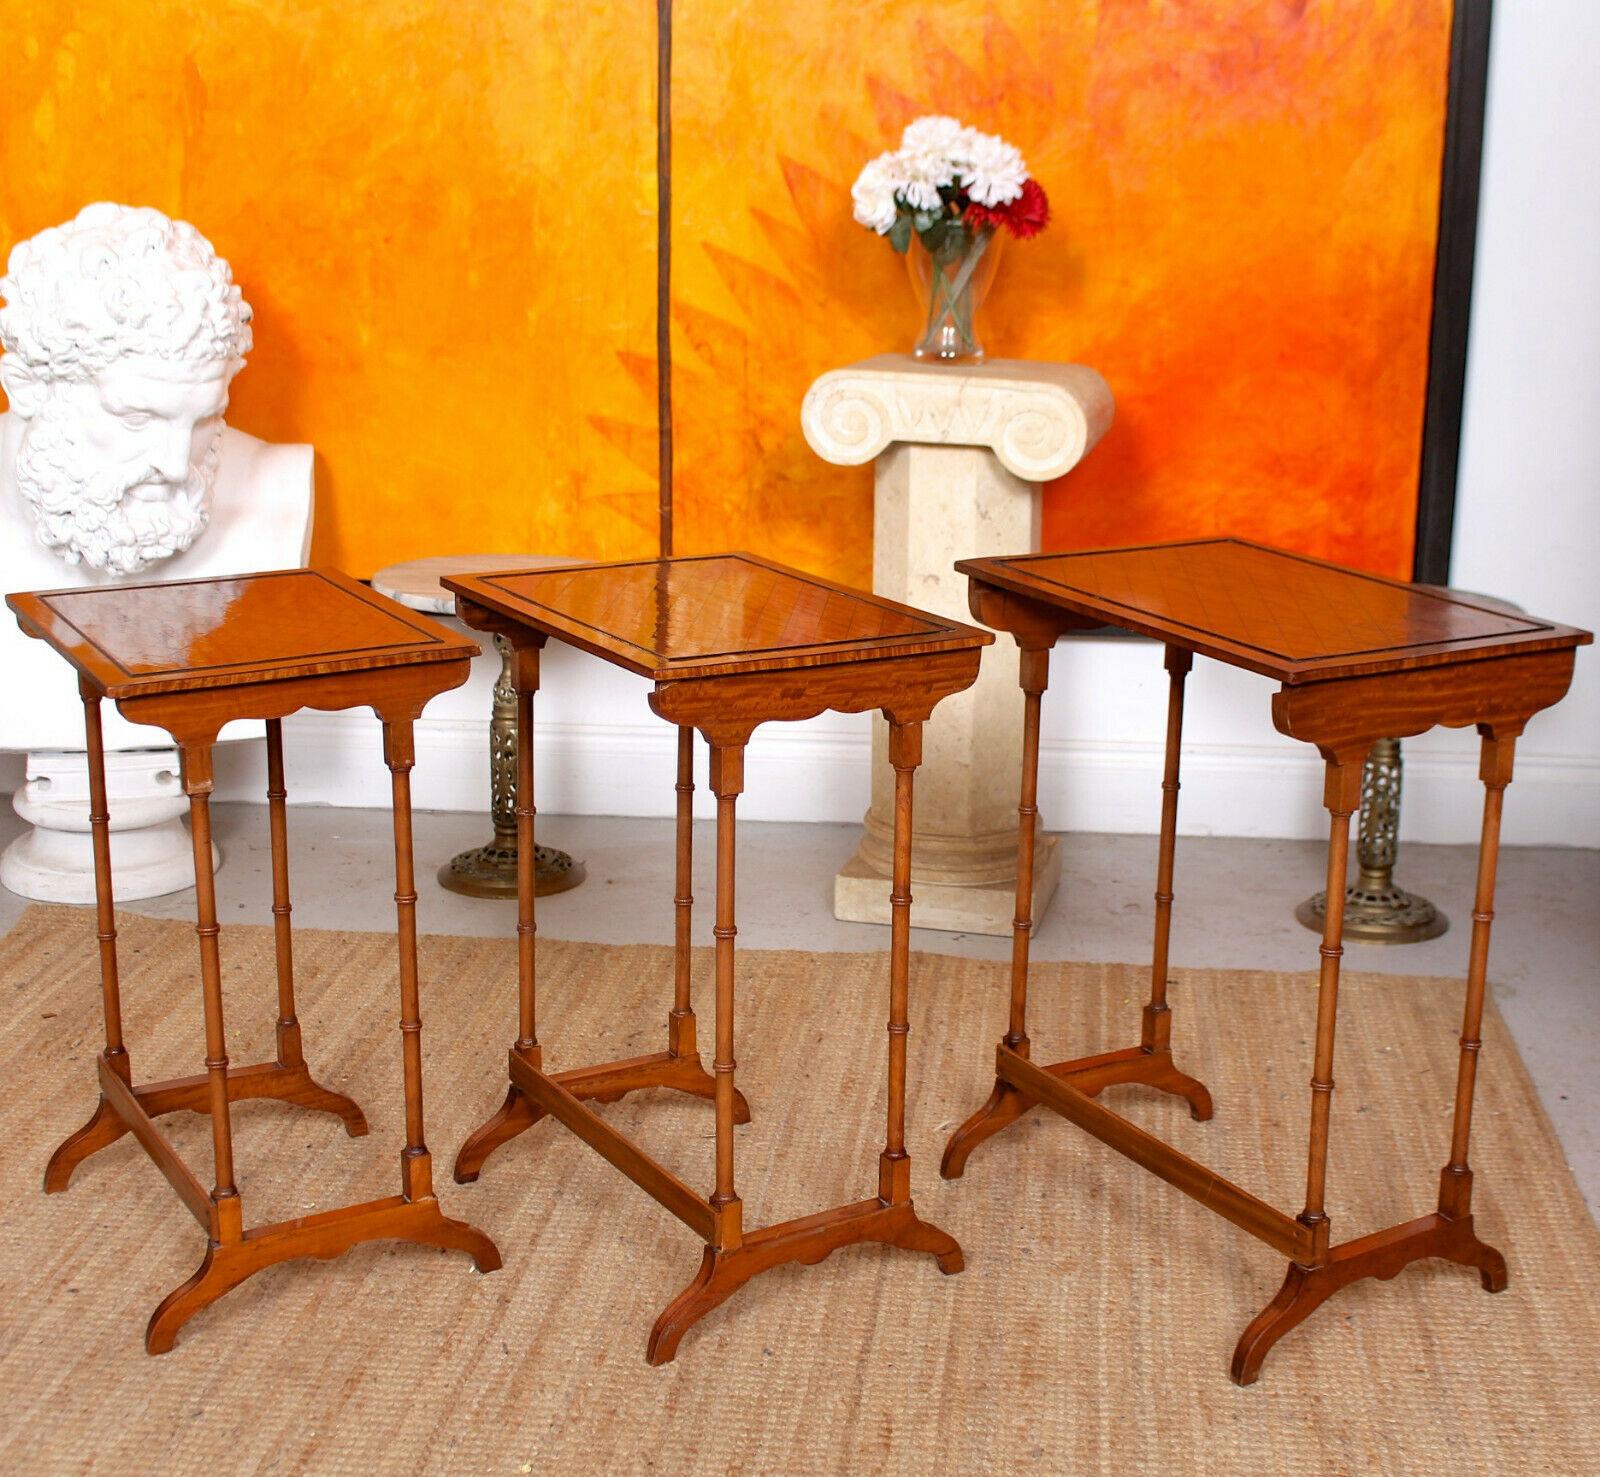 English Nest of Tables Satinwood Crossbanded 3 Side Tables Tall Georgian For Sale 4